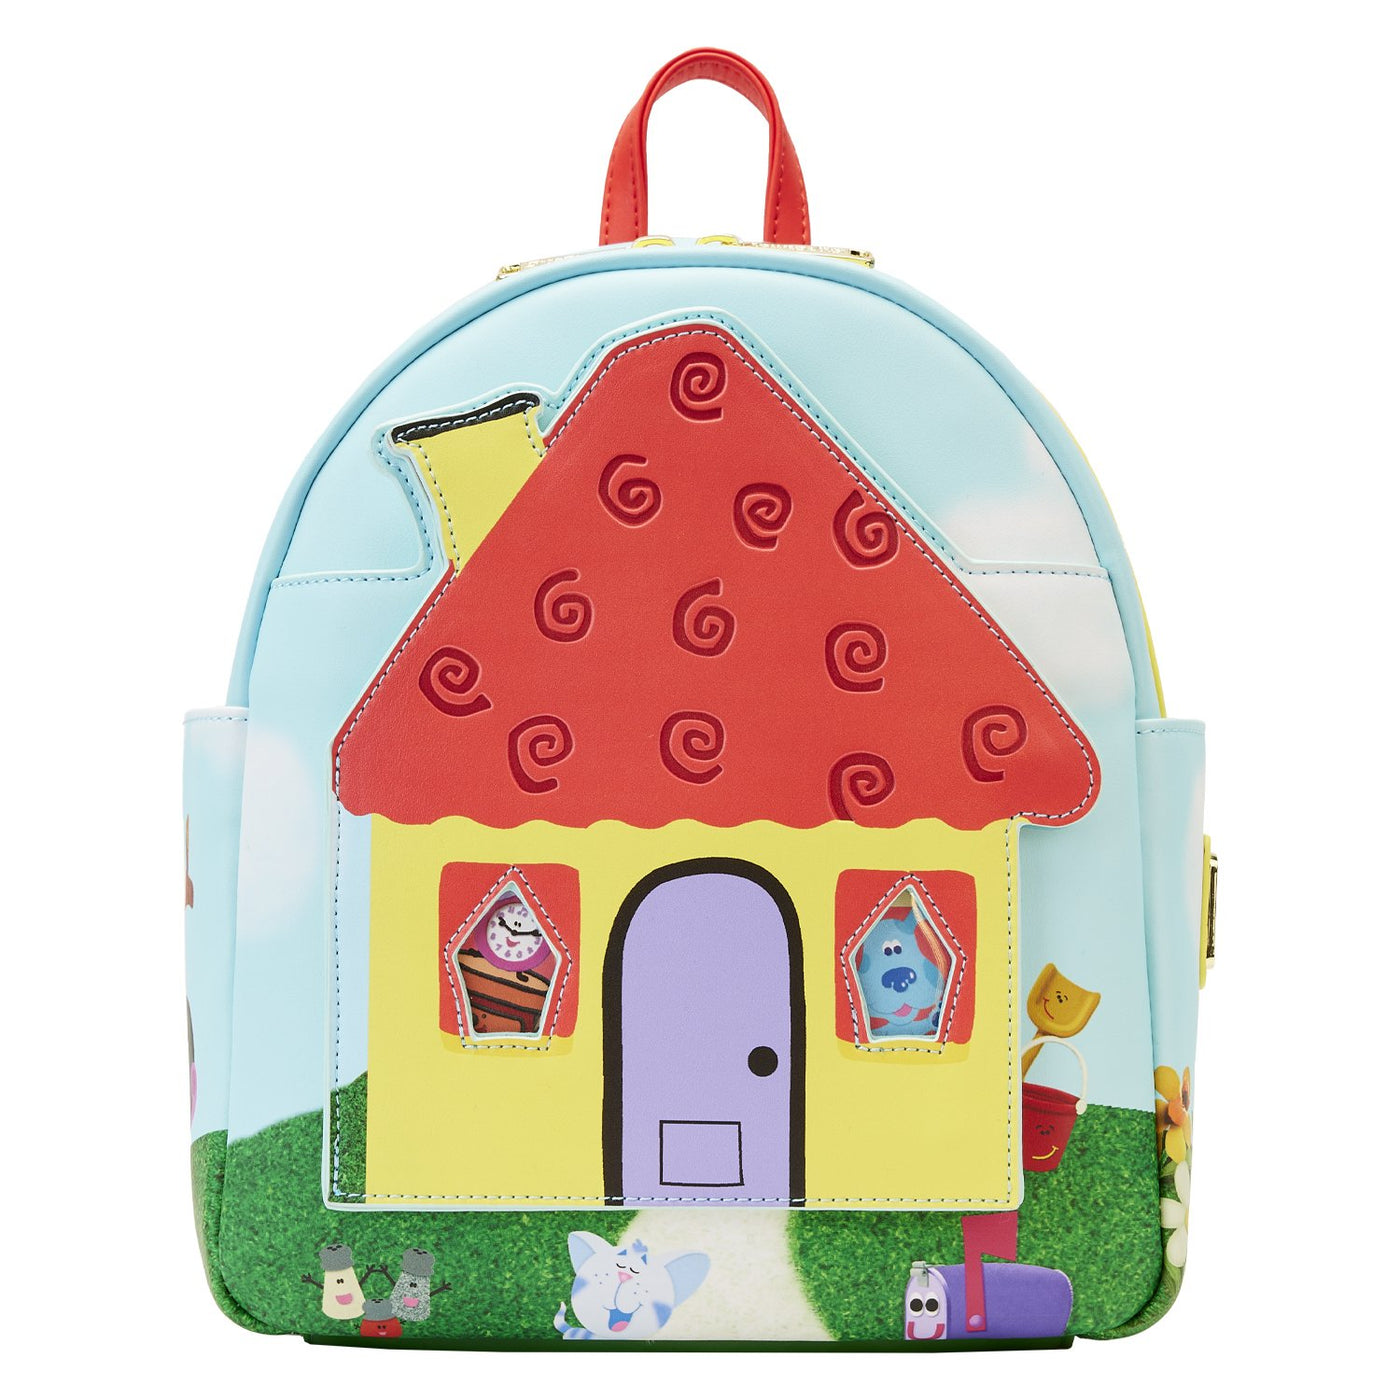 671803451001 - Loungefly Nickelodeon Blues Clues Open House Mini Backpack - Front